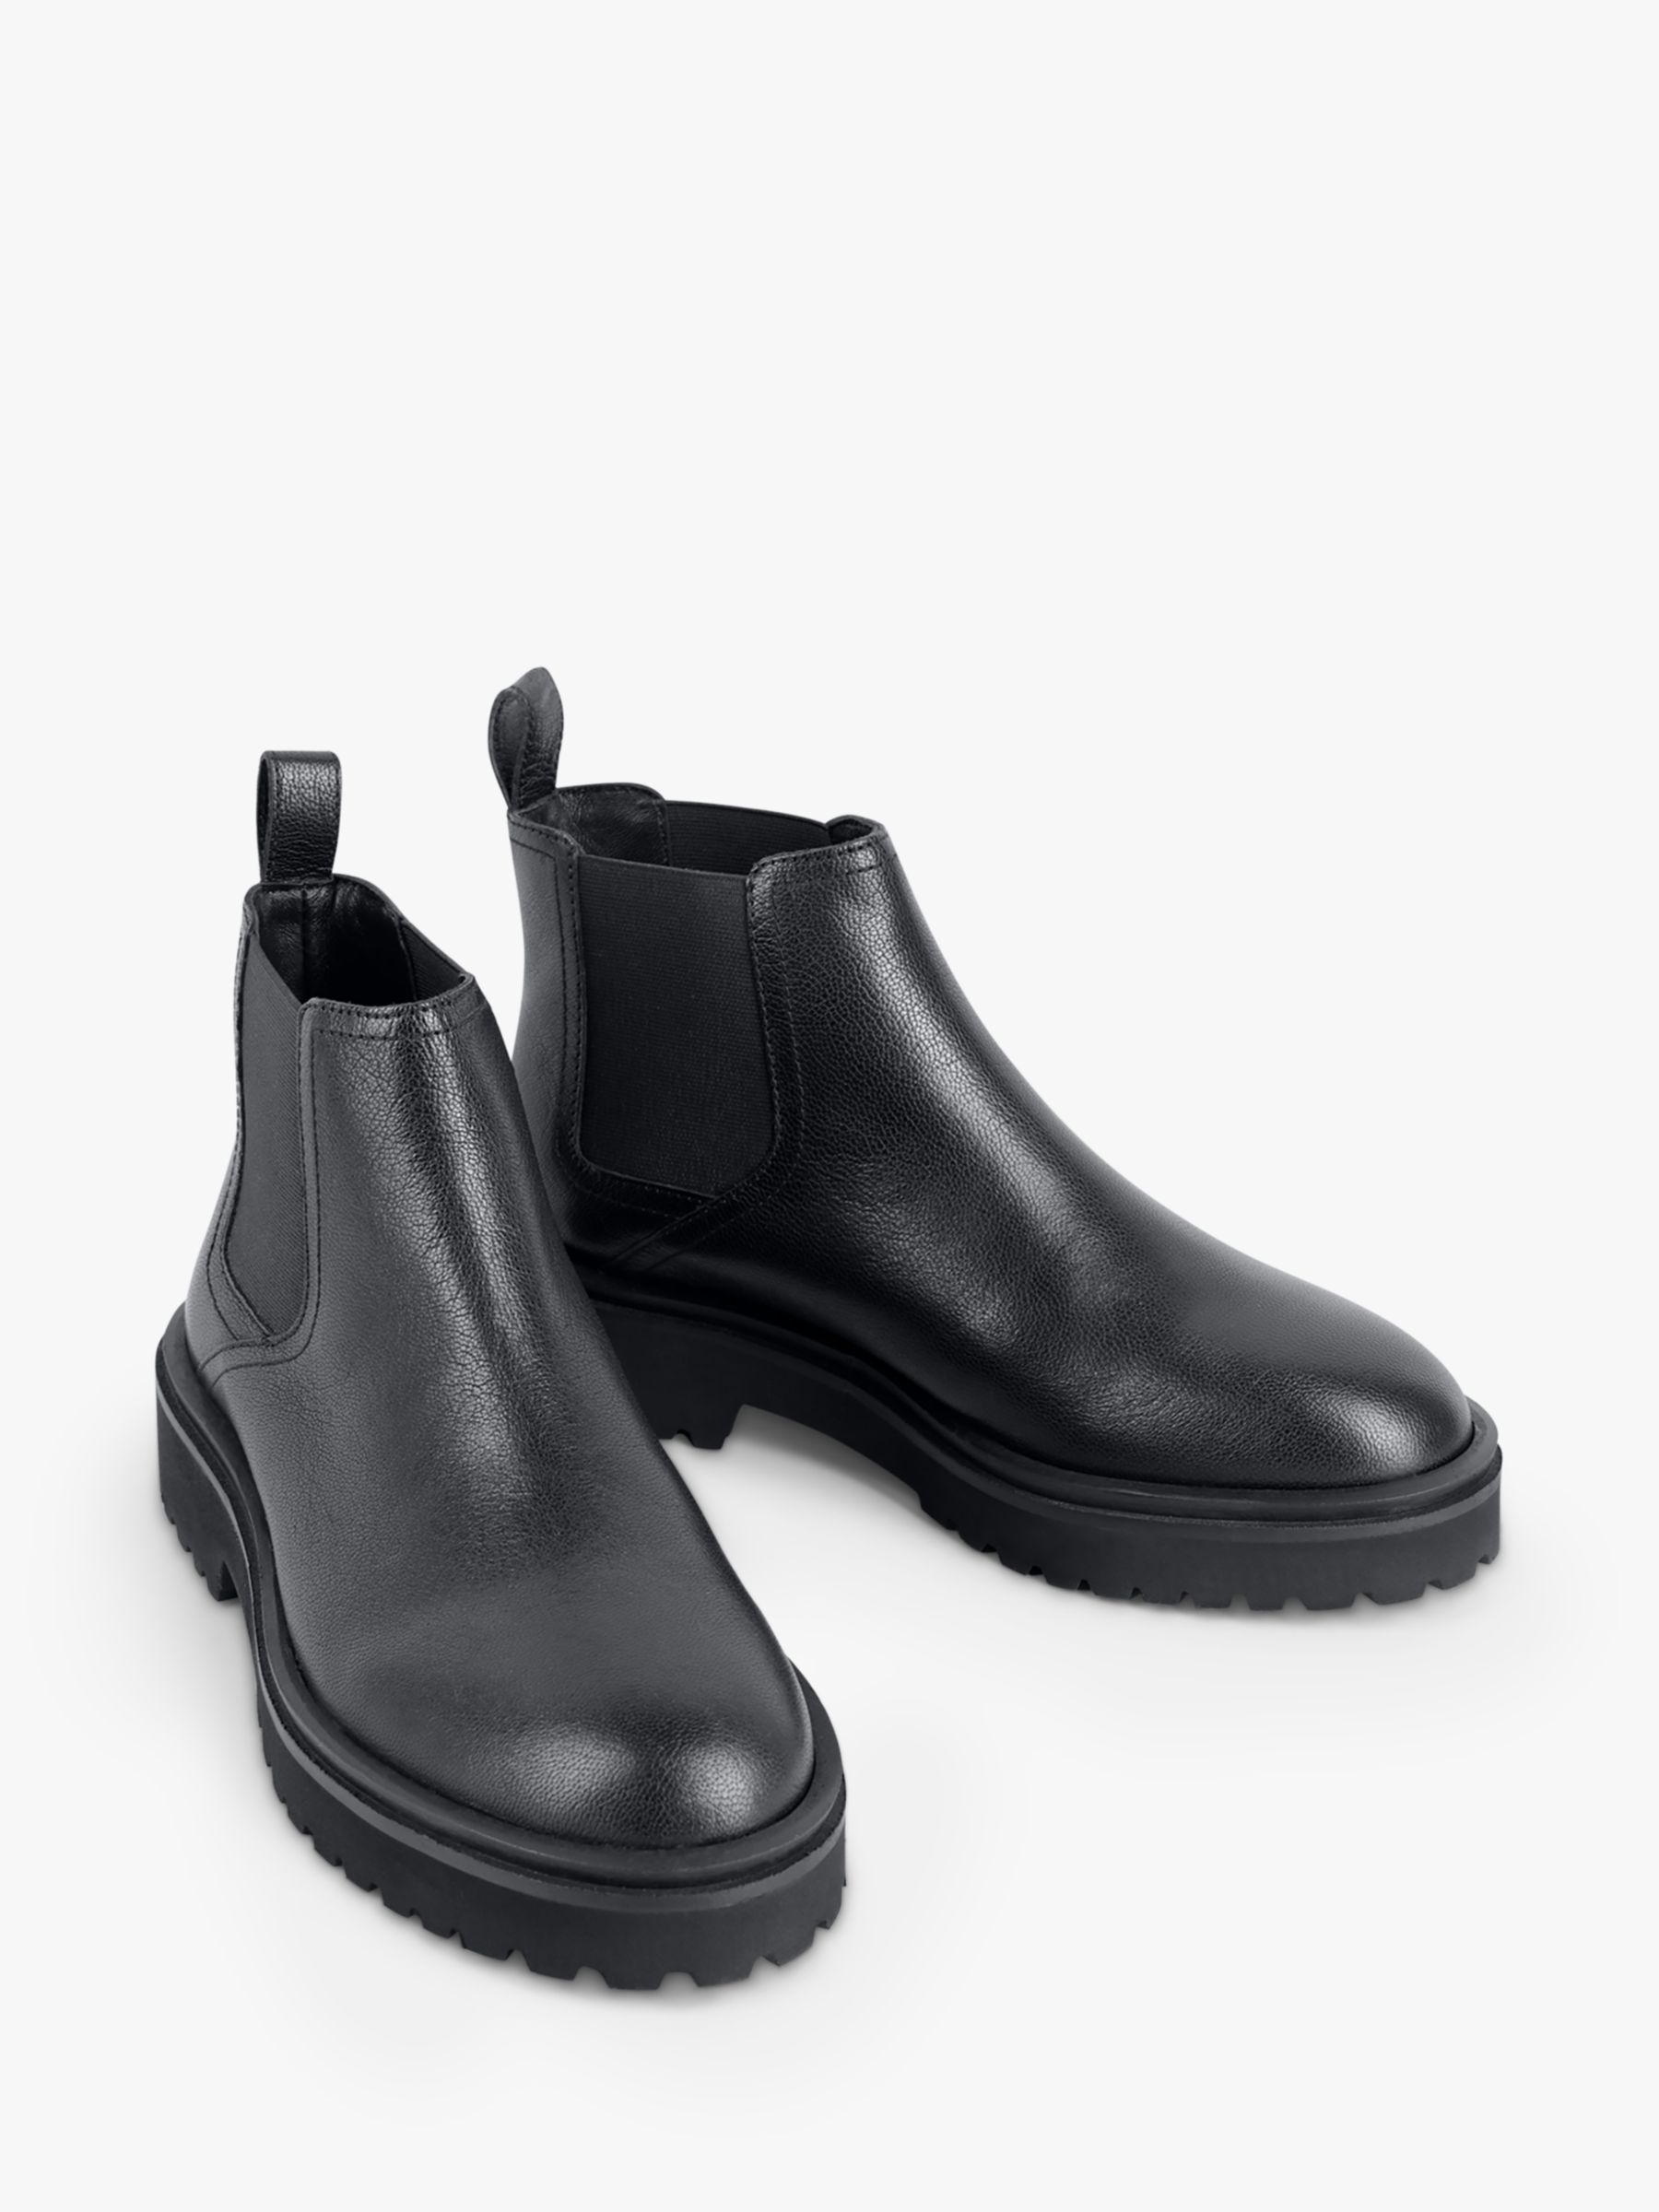 hush Lucan Leather Chelsea Boots, Black at John Lewis & Partners